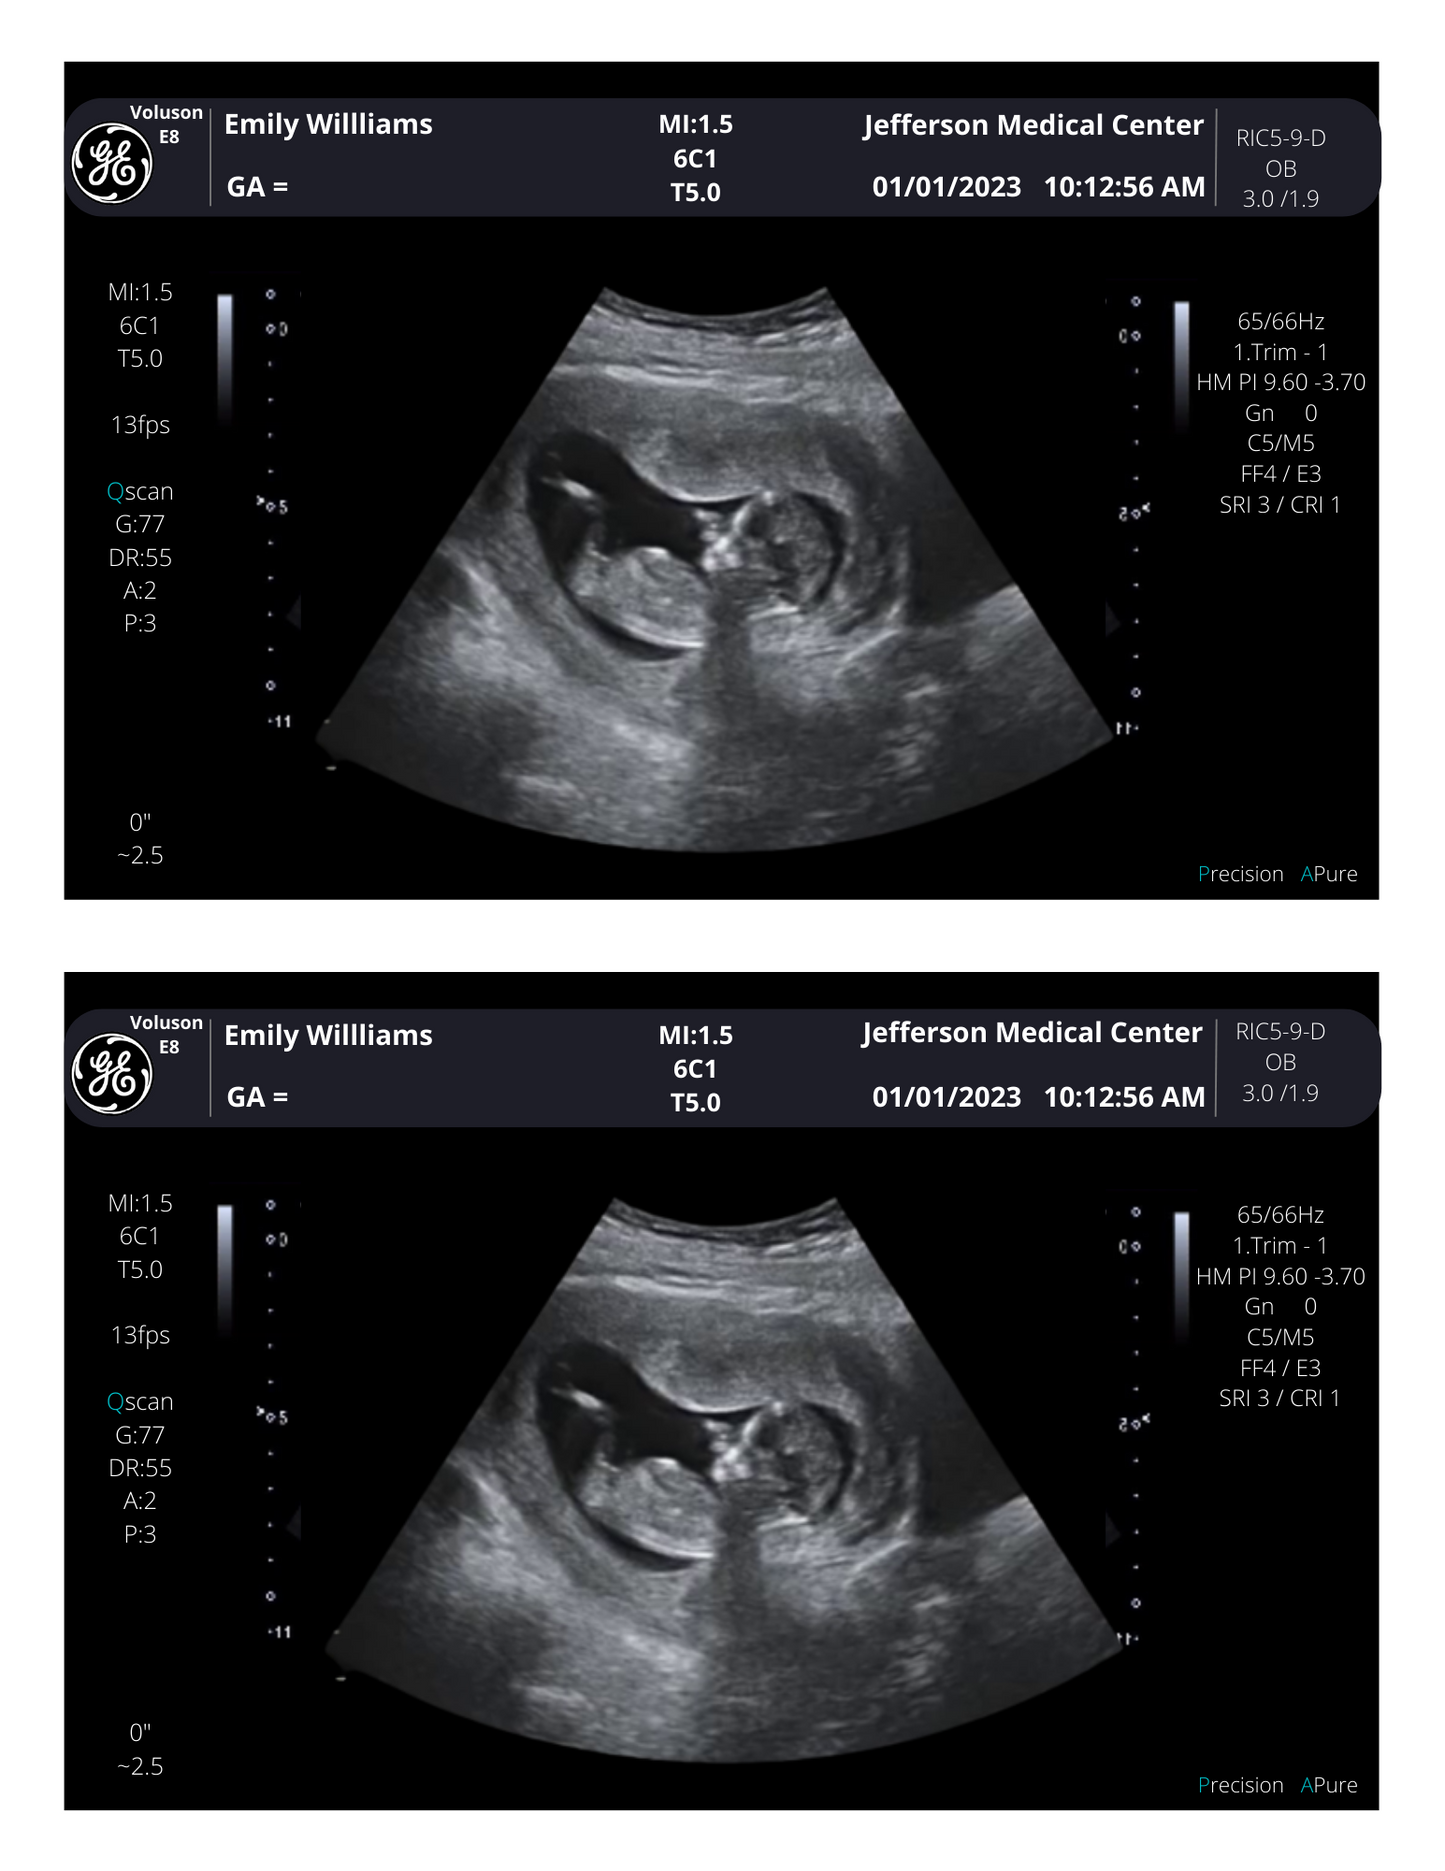 Personalized Fake Ultrasound Sonogram Picture!! From 3-40 weeks!